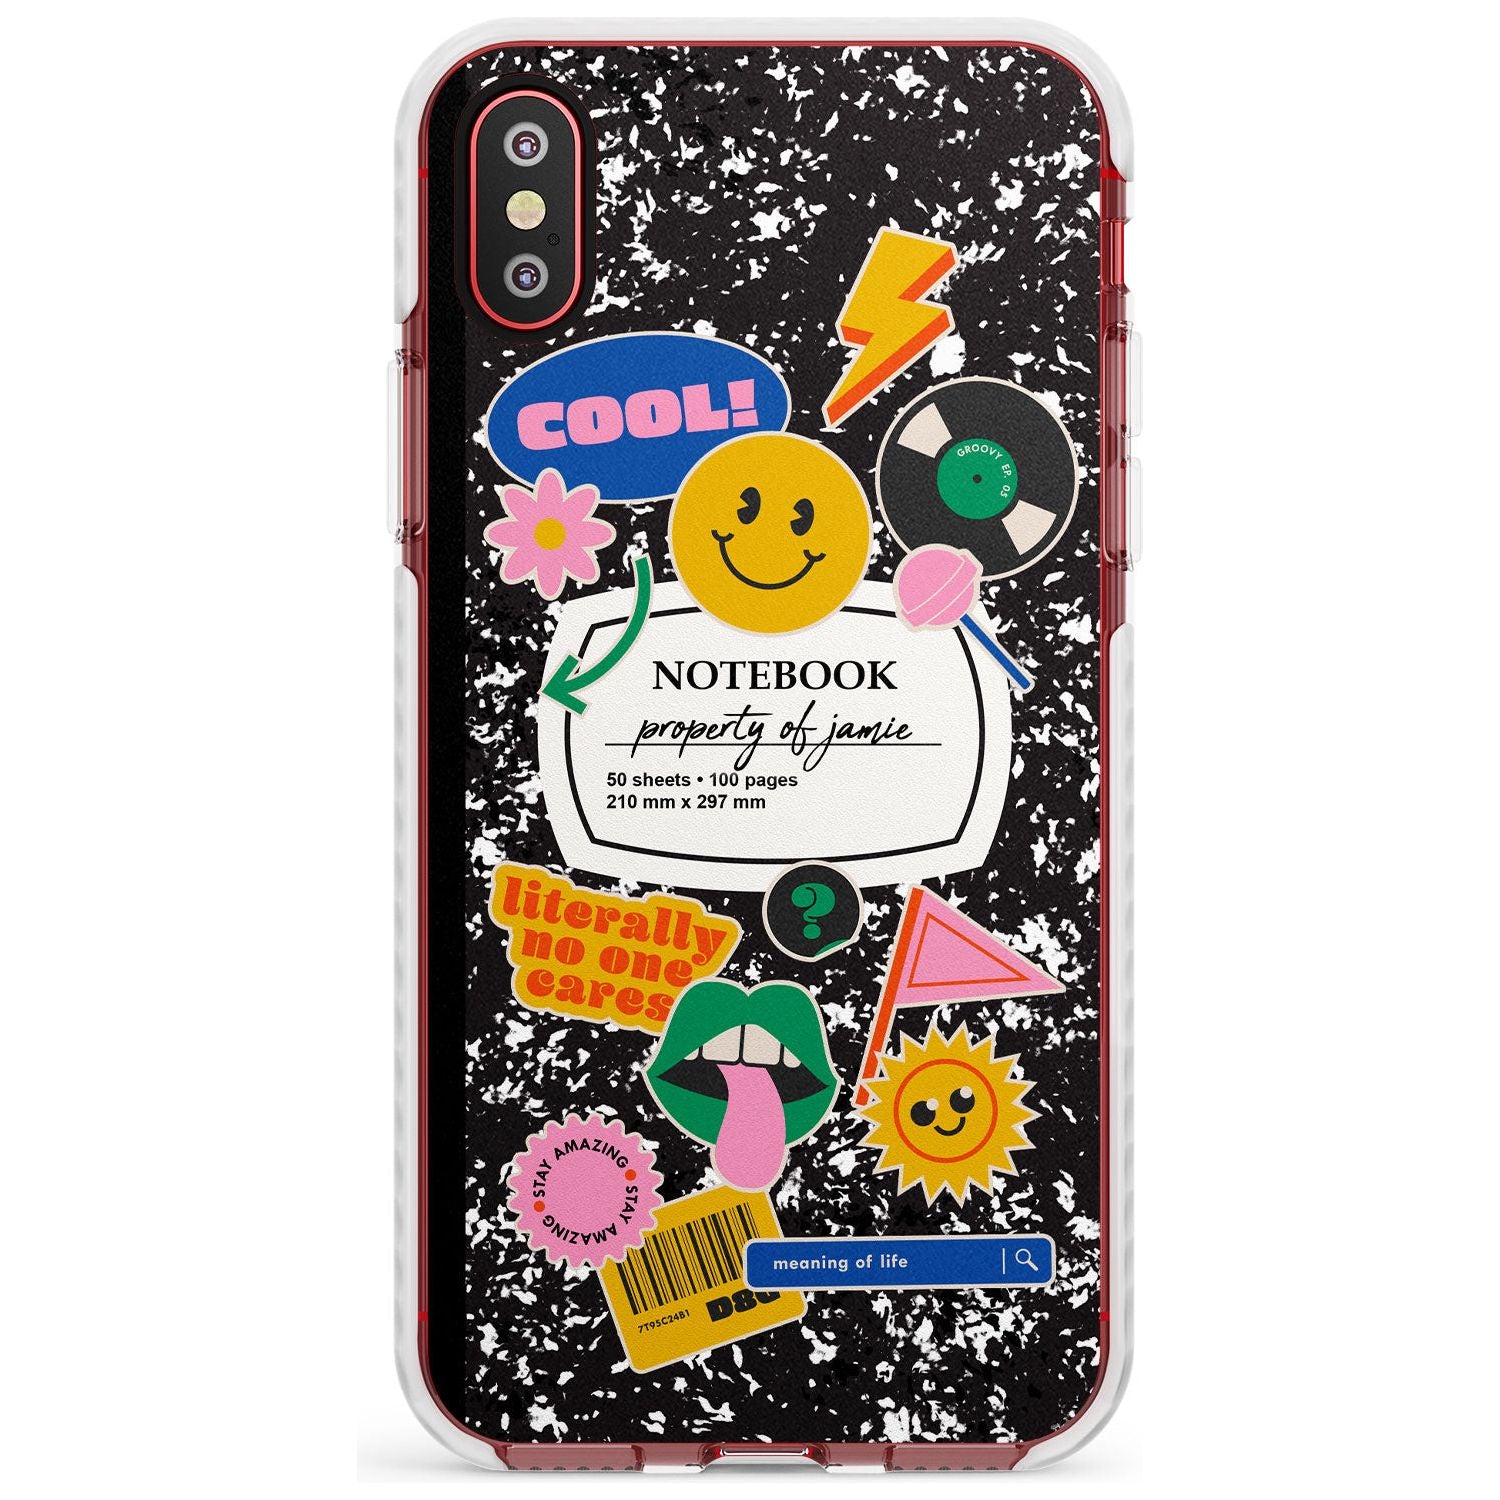 Custom Notebook Cover with Stickers Slim TPU Phone Case Warehouse X XS Max XR